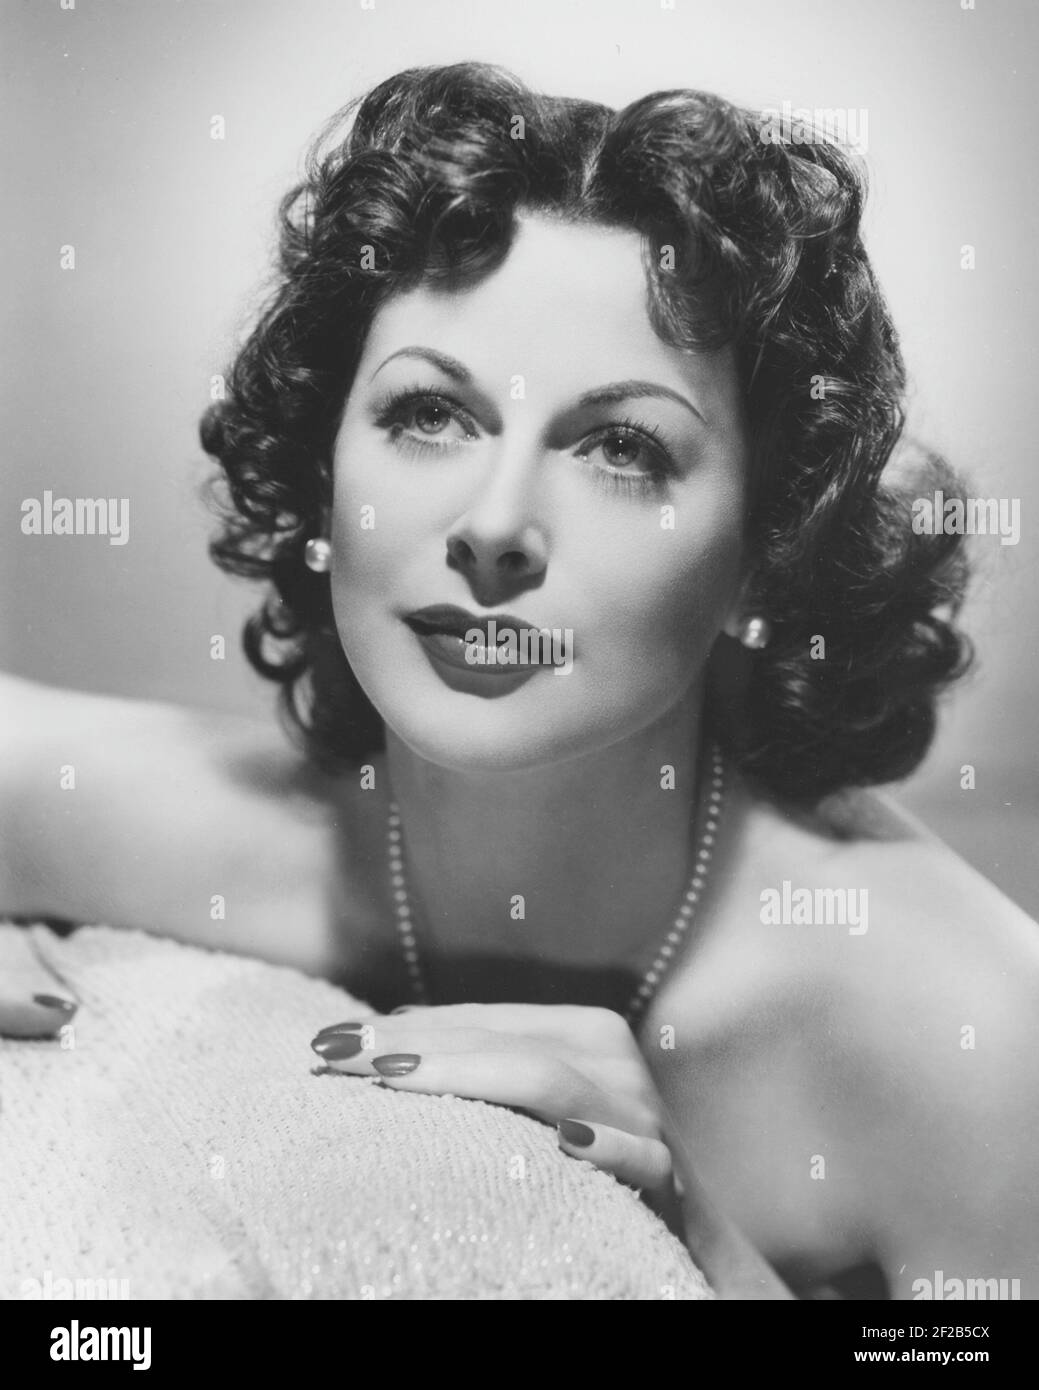 Hedy Lamarr. 1914-2000. Austrian born Hollywood actress who also is know for her inventions and patents in radiocommunication. 1940s Stock Photo